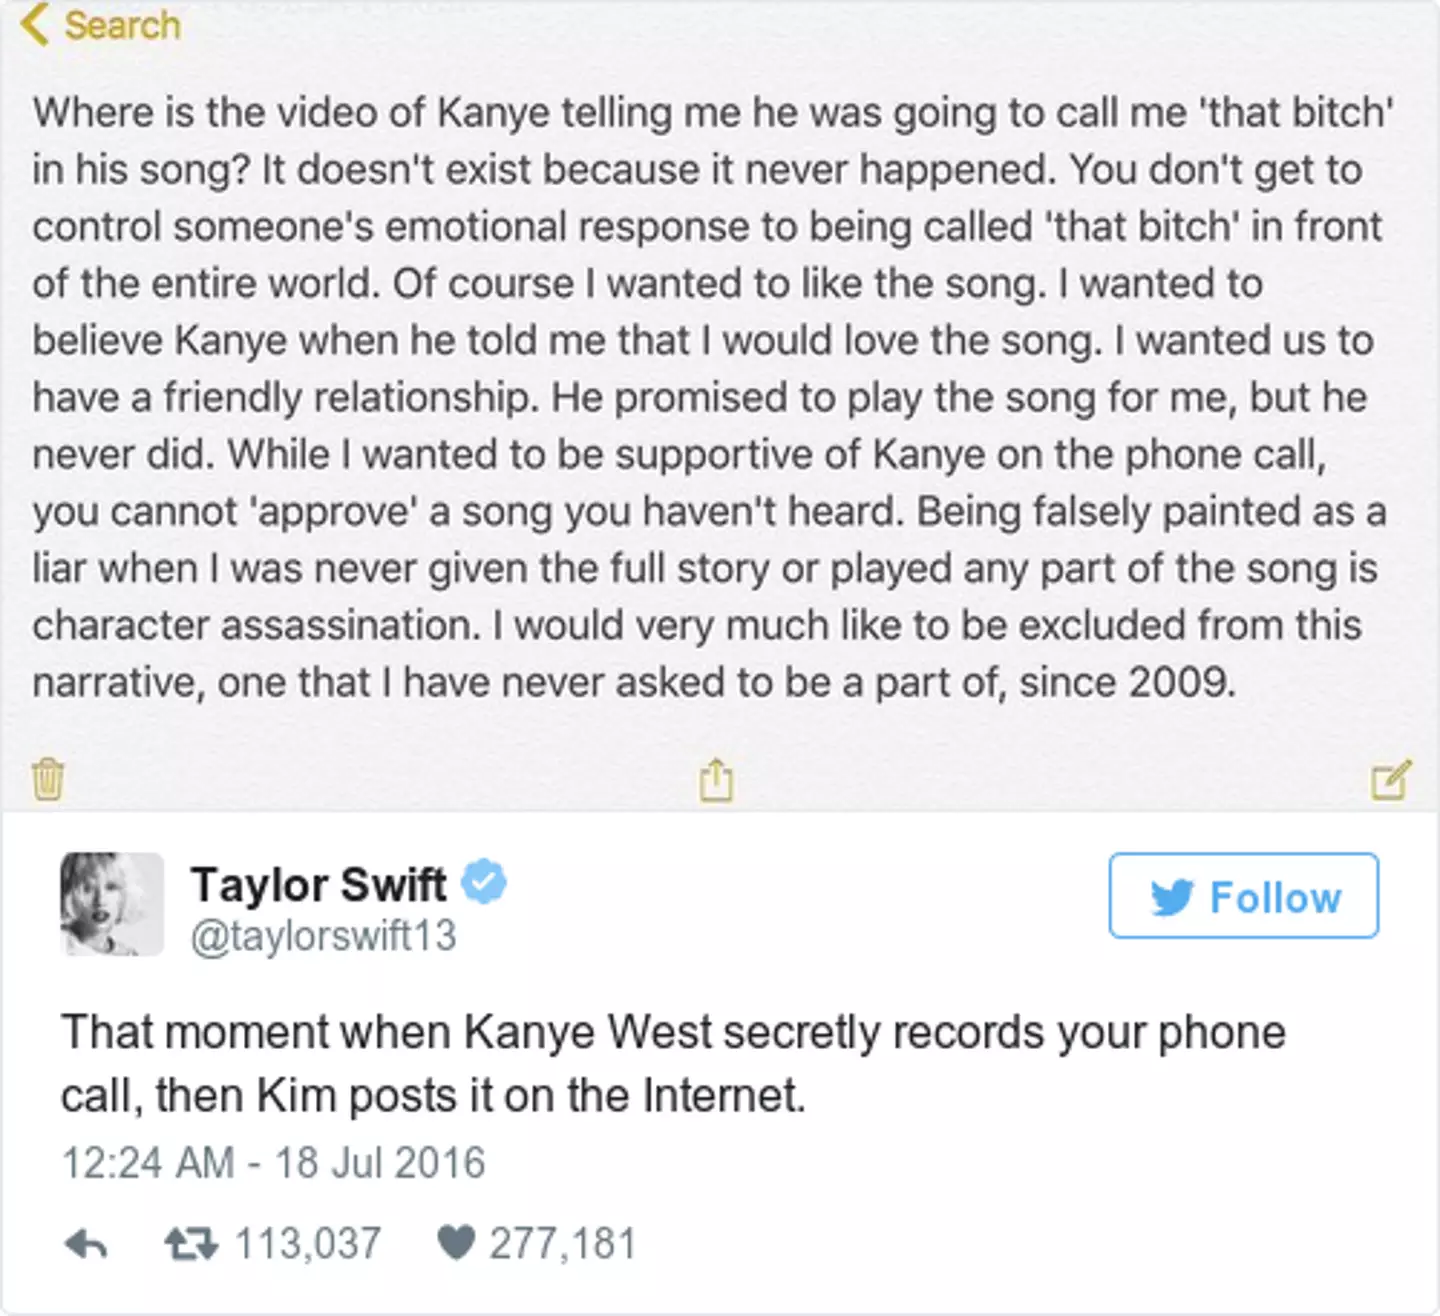 Taylor Swift addressed the phone call with Kanye in 2016.